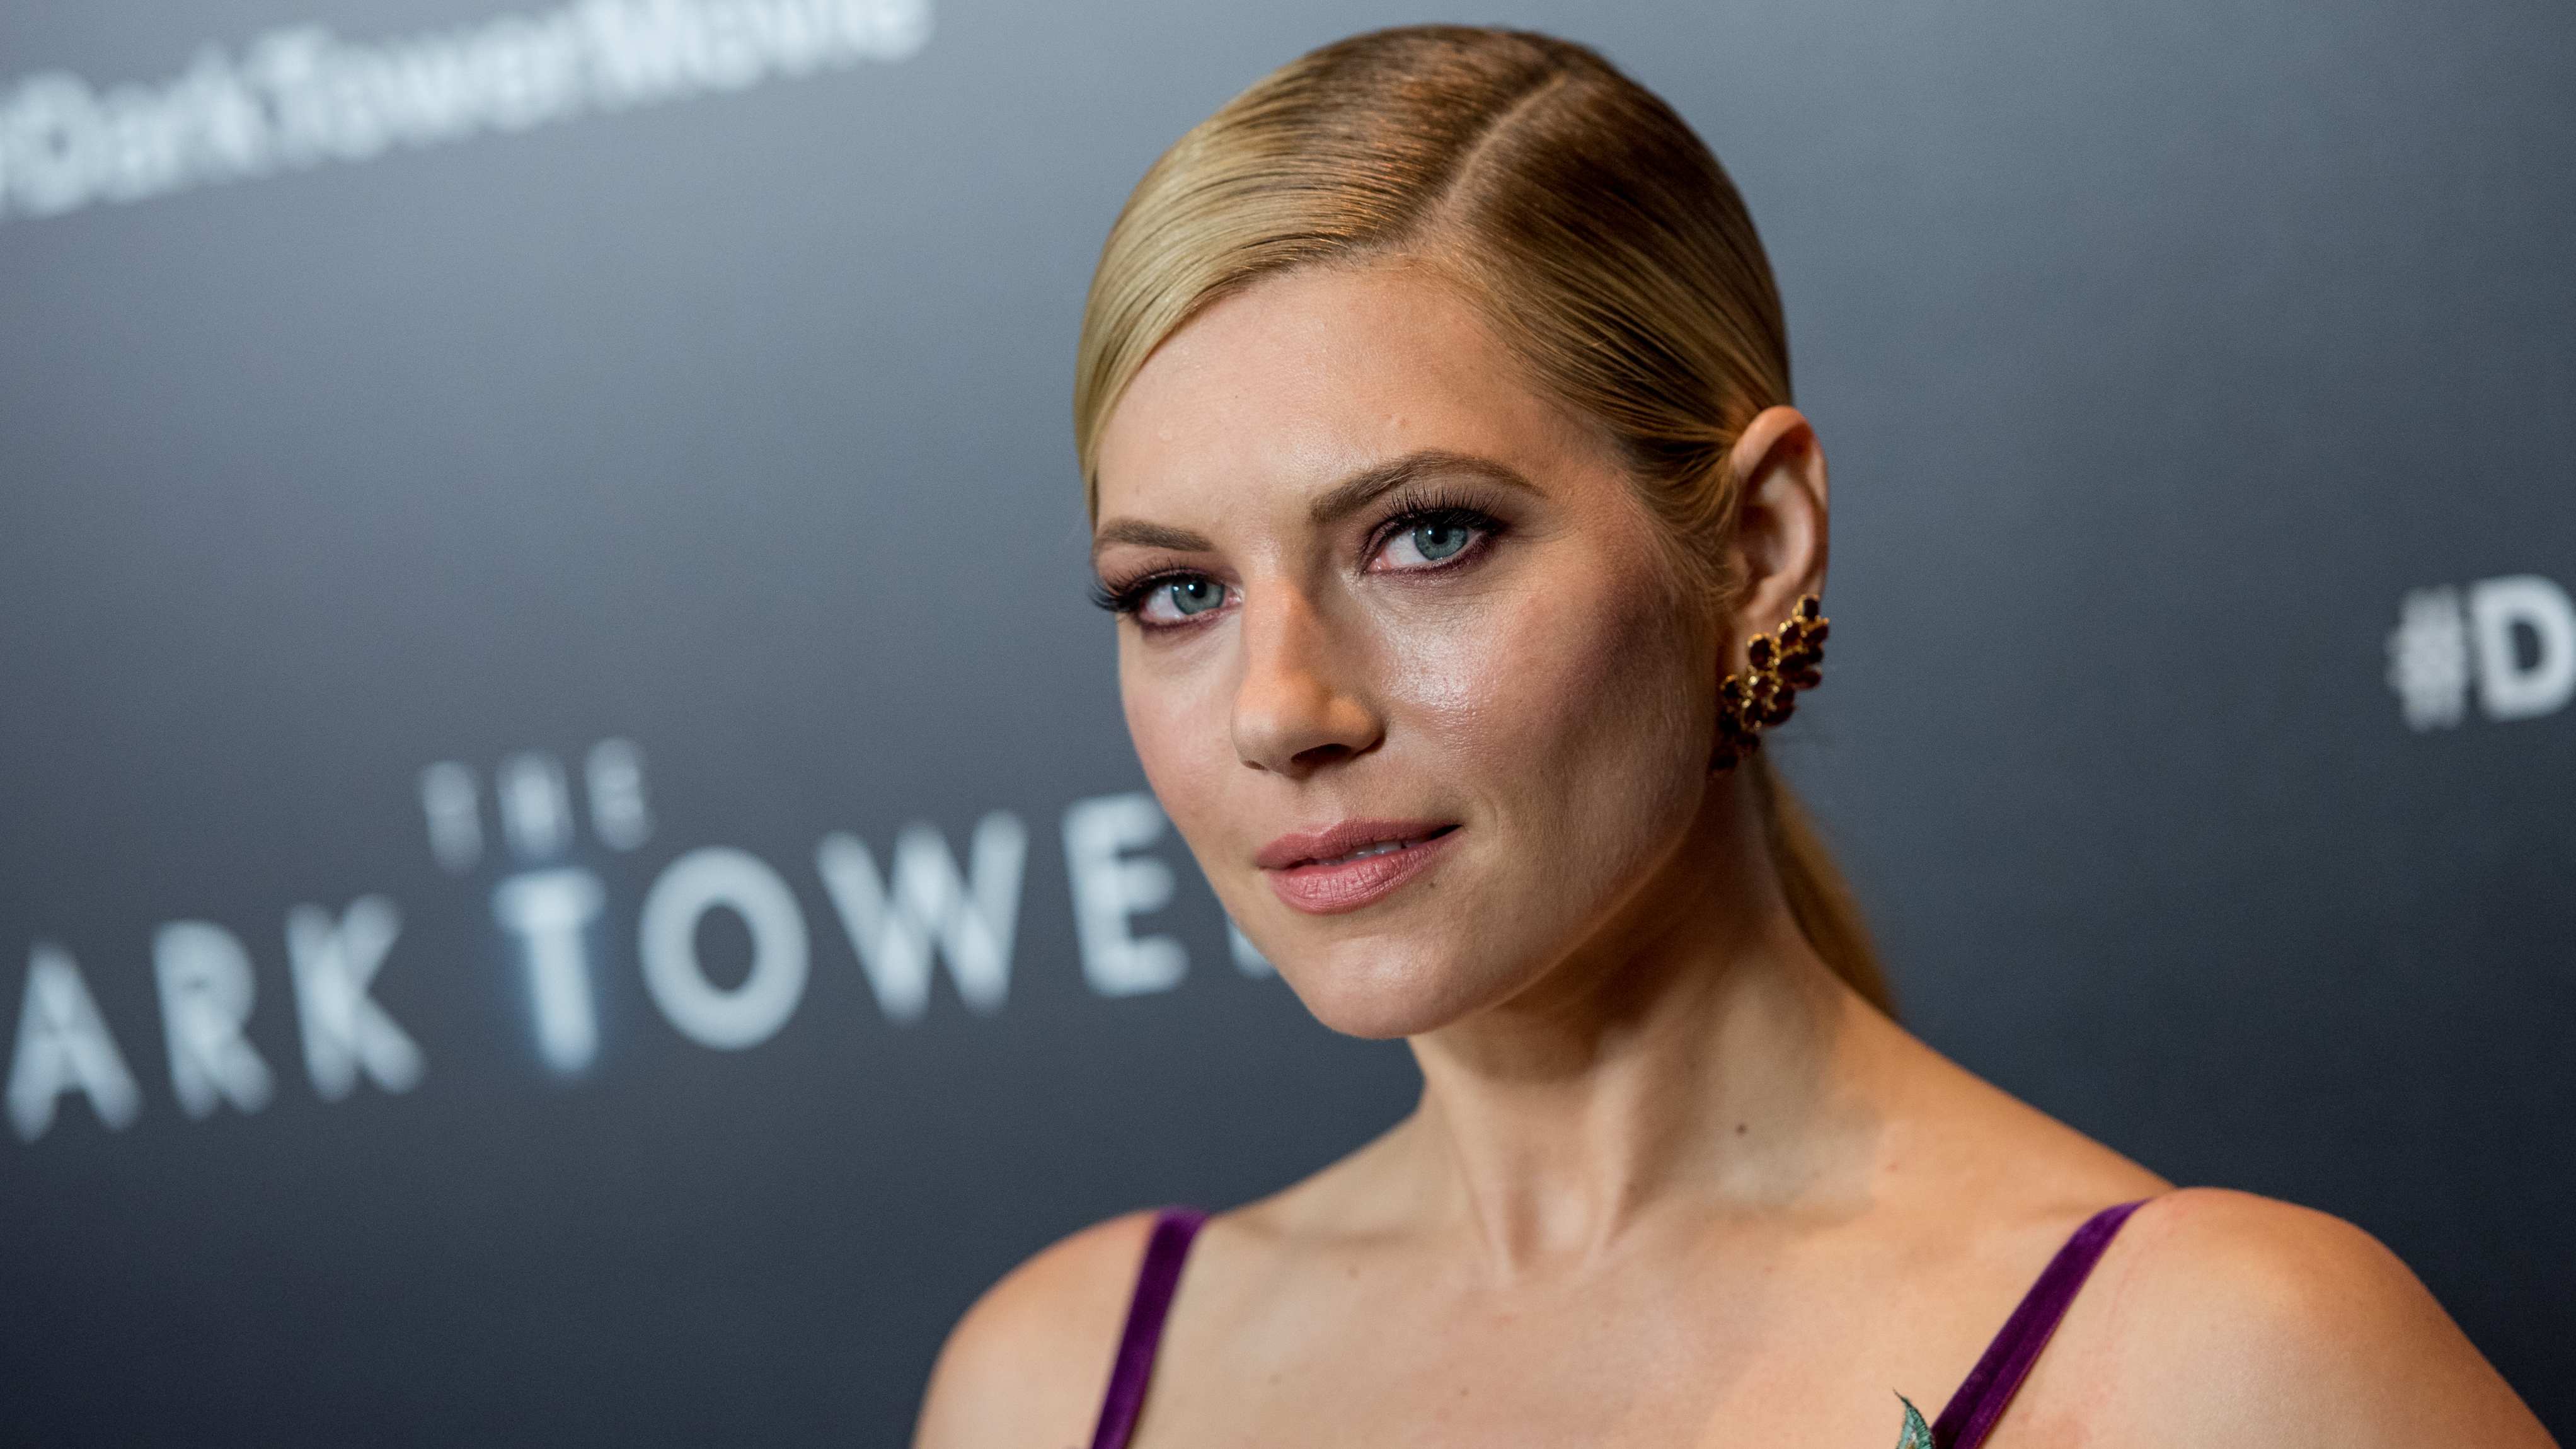 Vikings' Lagertha actress' stunning photo elicits reaction from 'Bjorn  Ironside